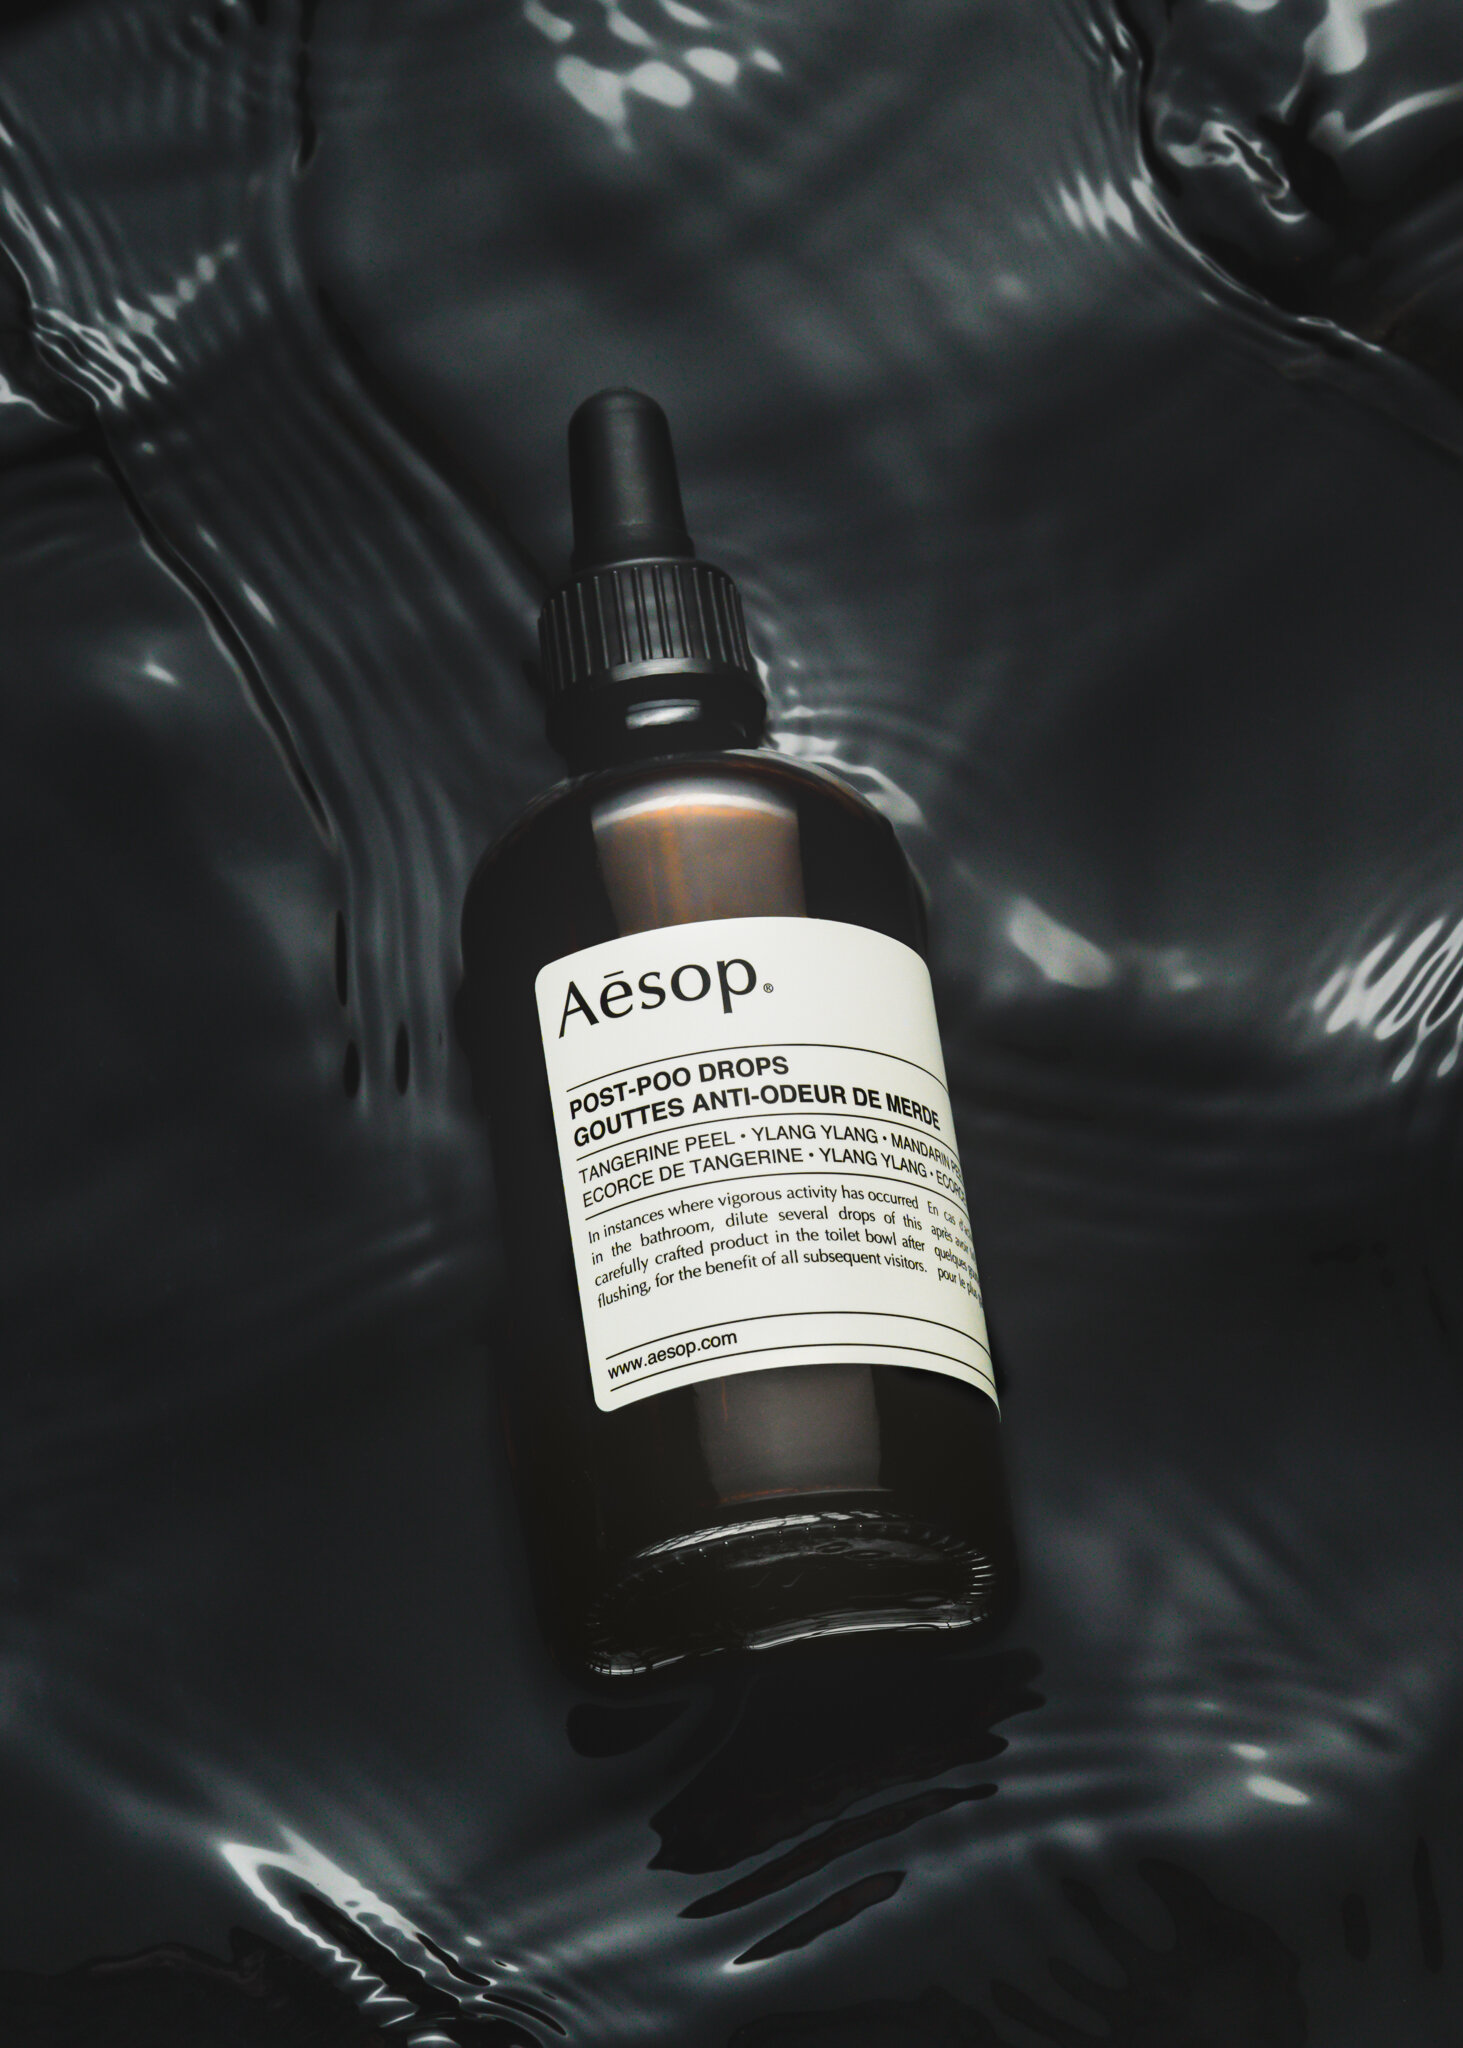  Aesop product photography by photographer Lee Starnes 